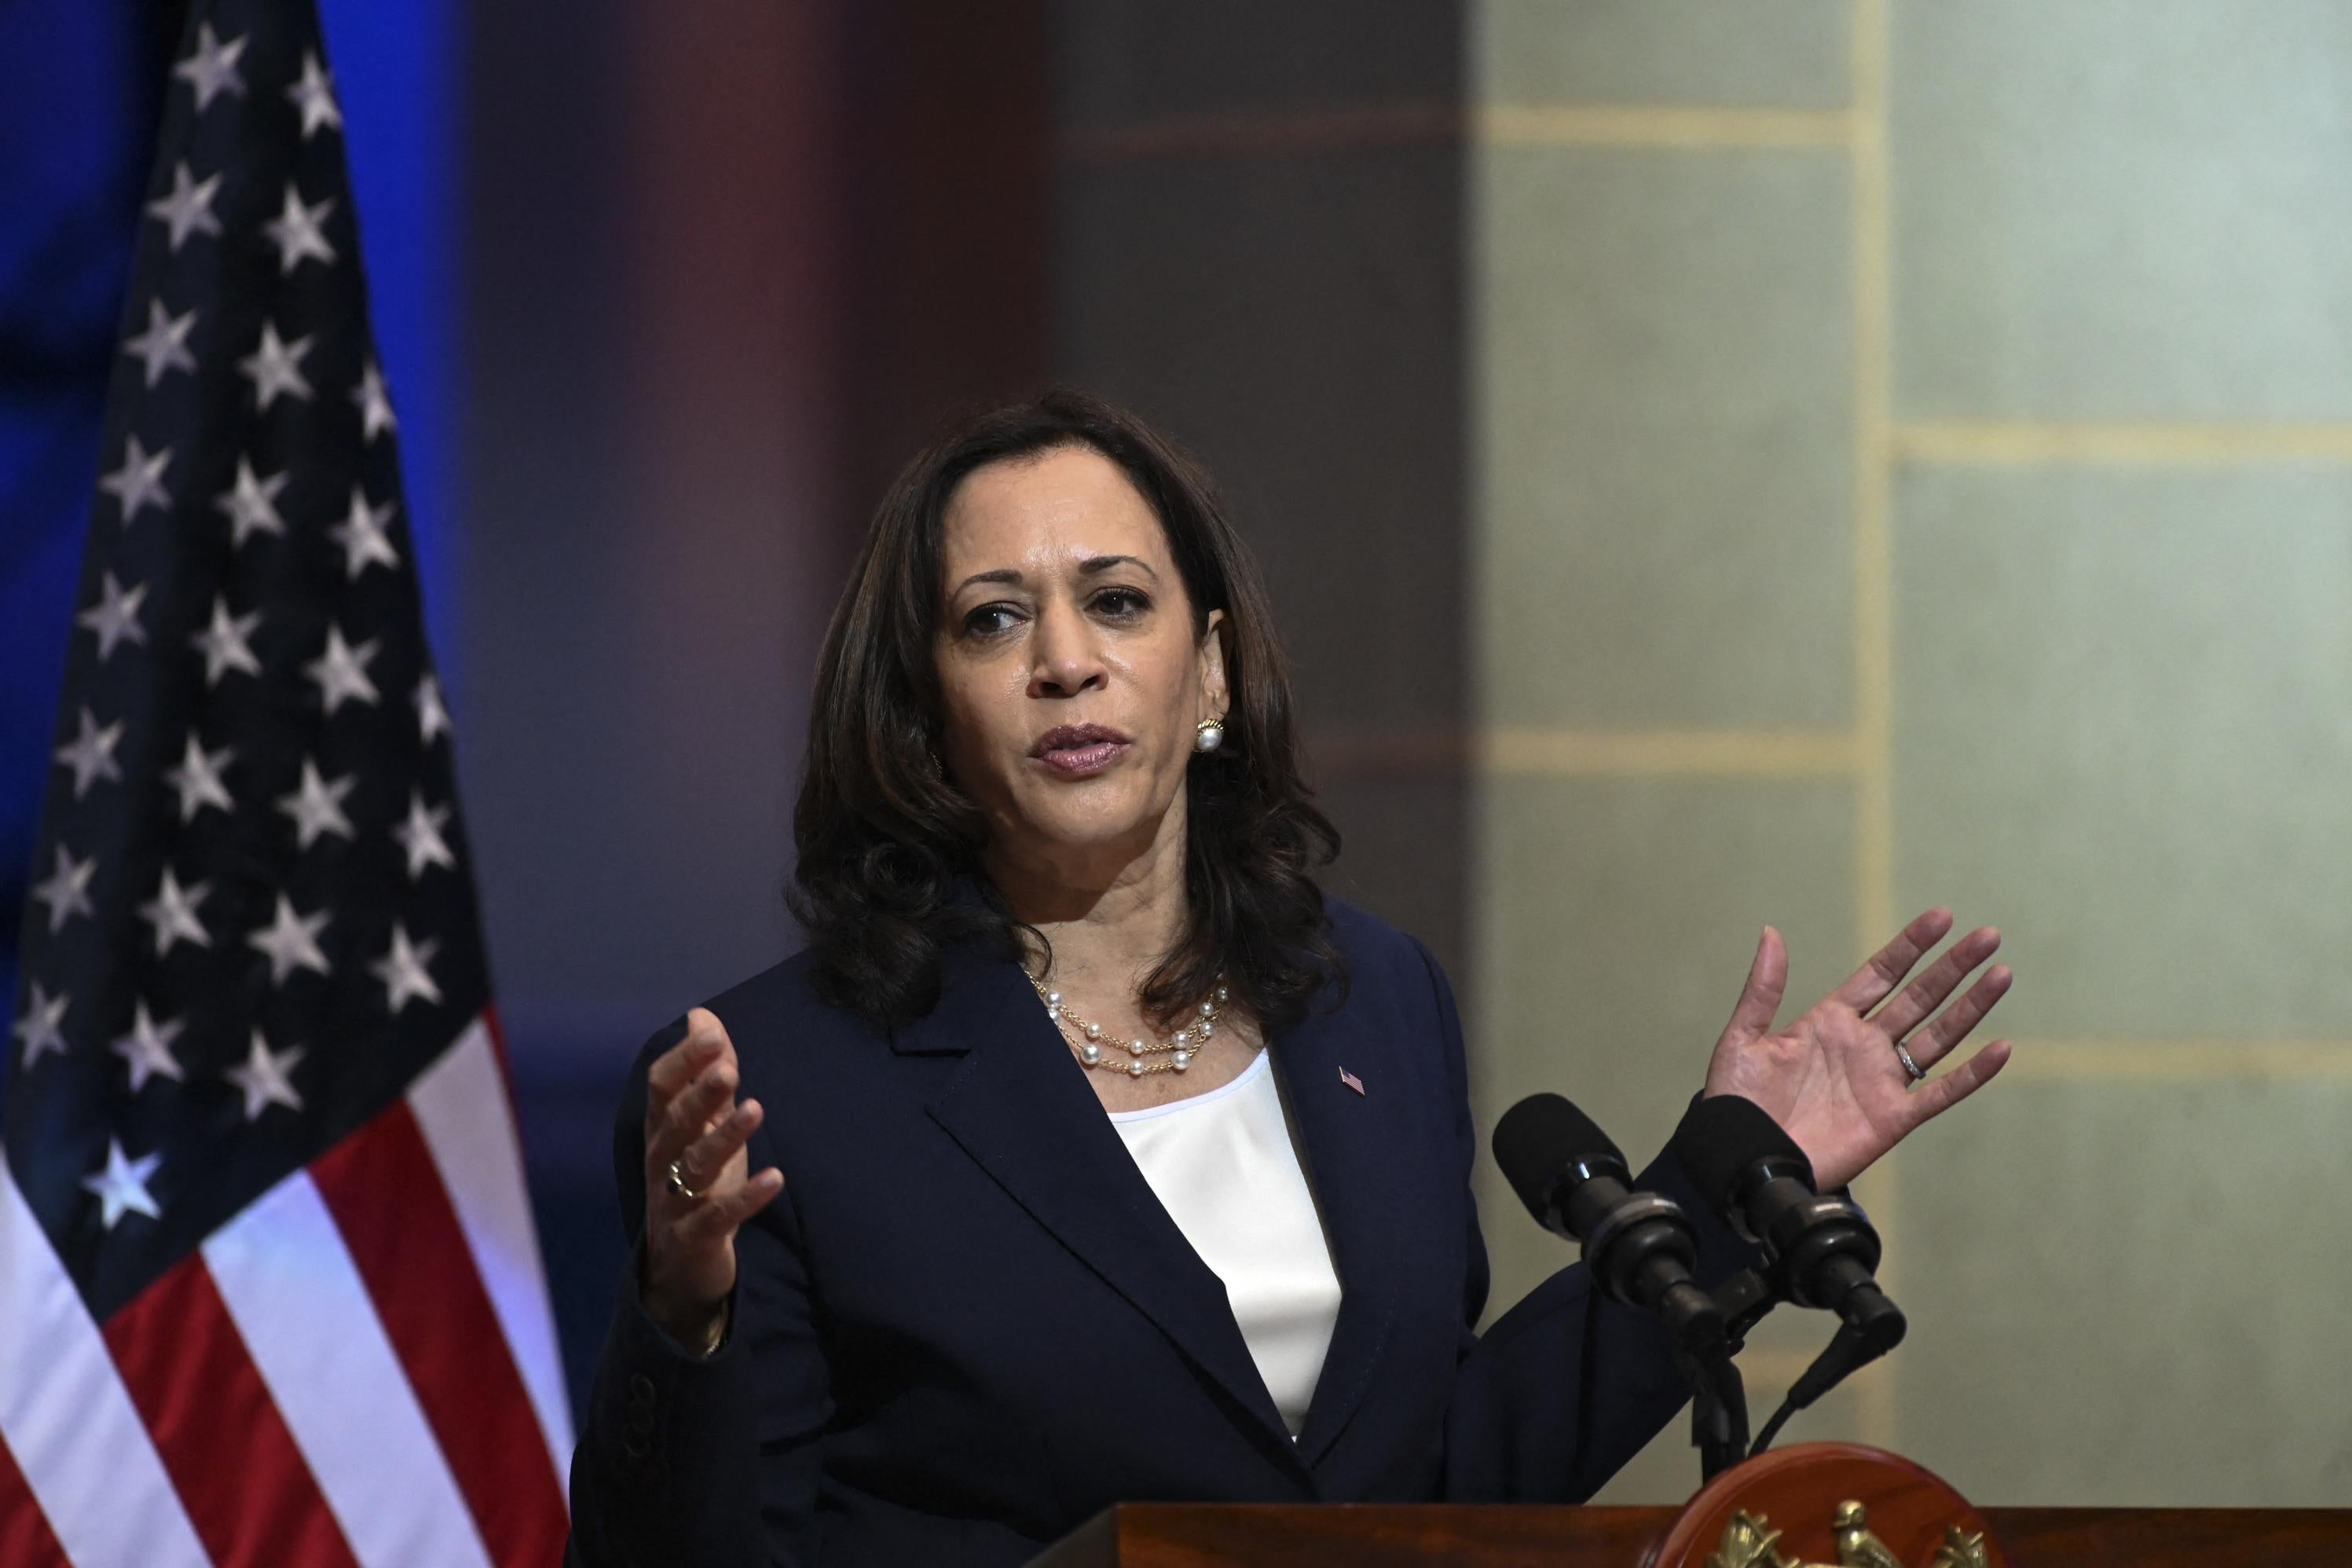 Harris gestures with both hands while speaking at a podium with an American flag behind her